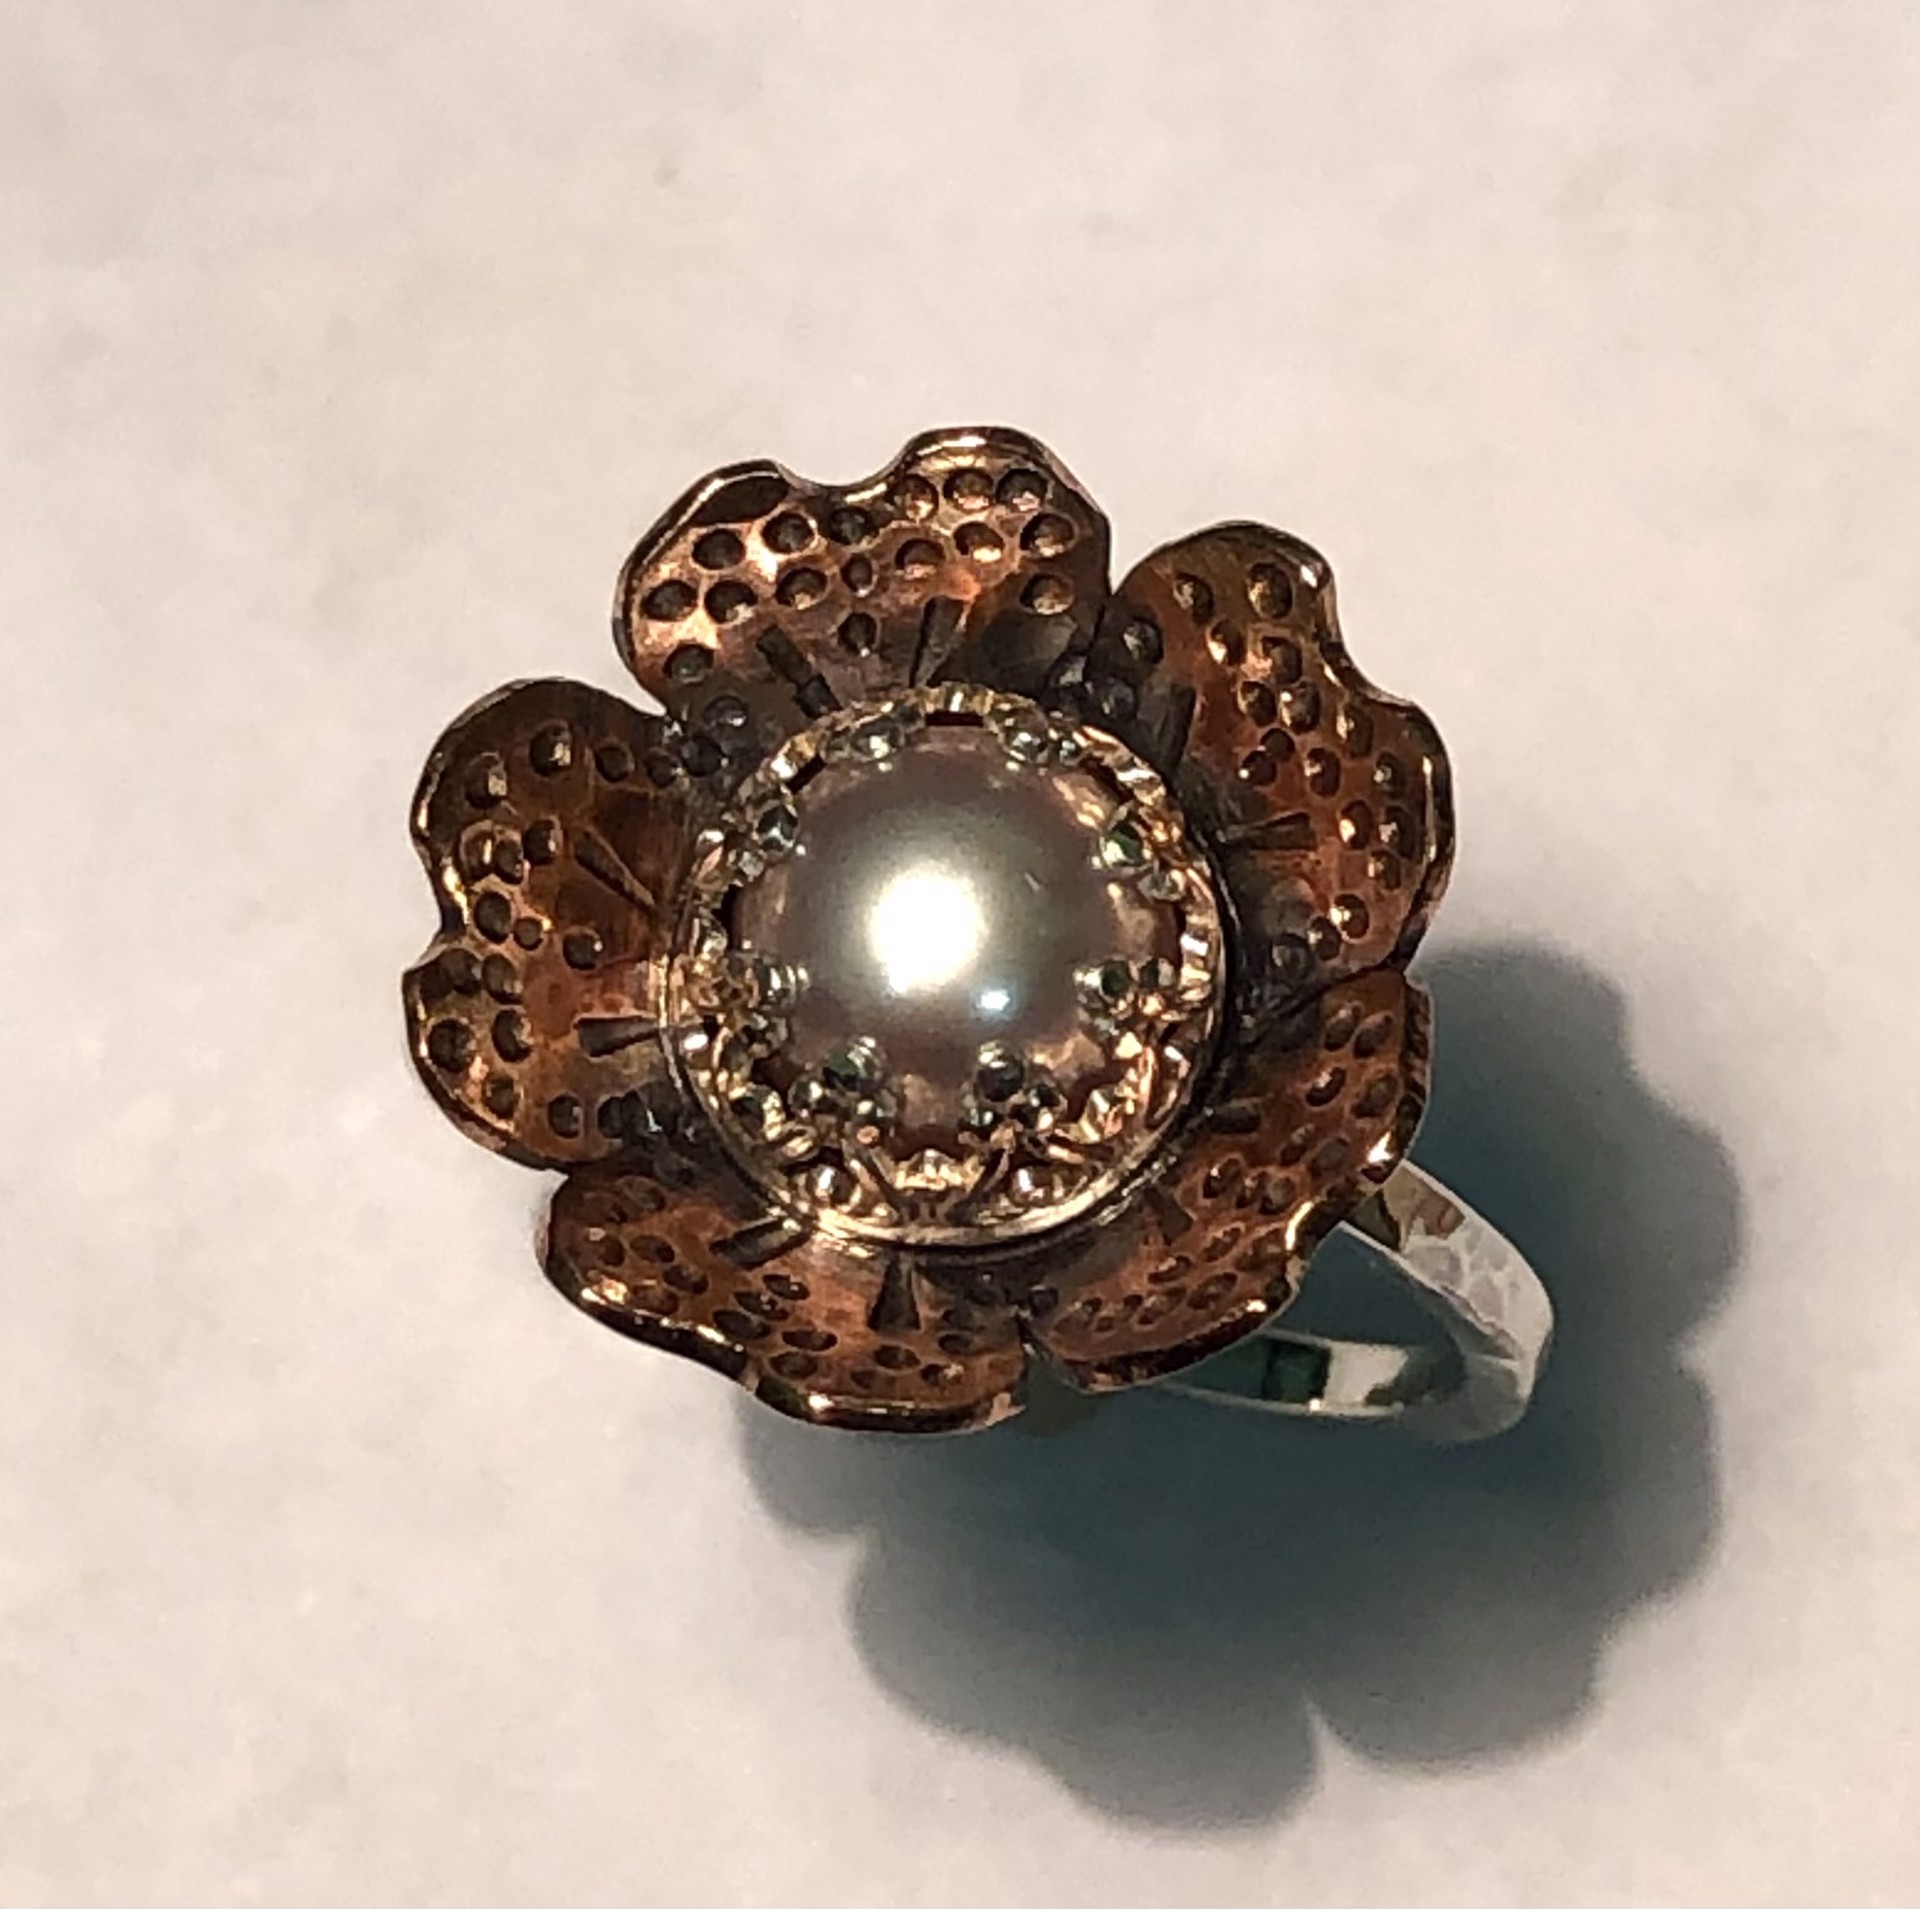 Large Pearl w/Gallery Wire, Copper Flower Ring  - Size 8.5 by Amelia Whelan